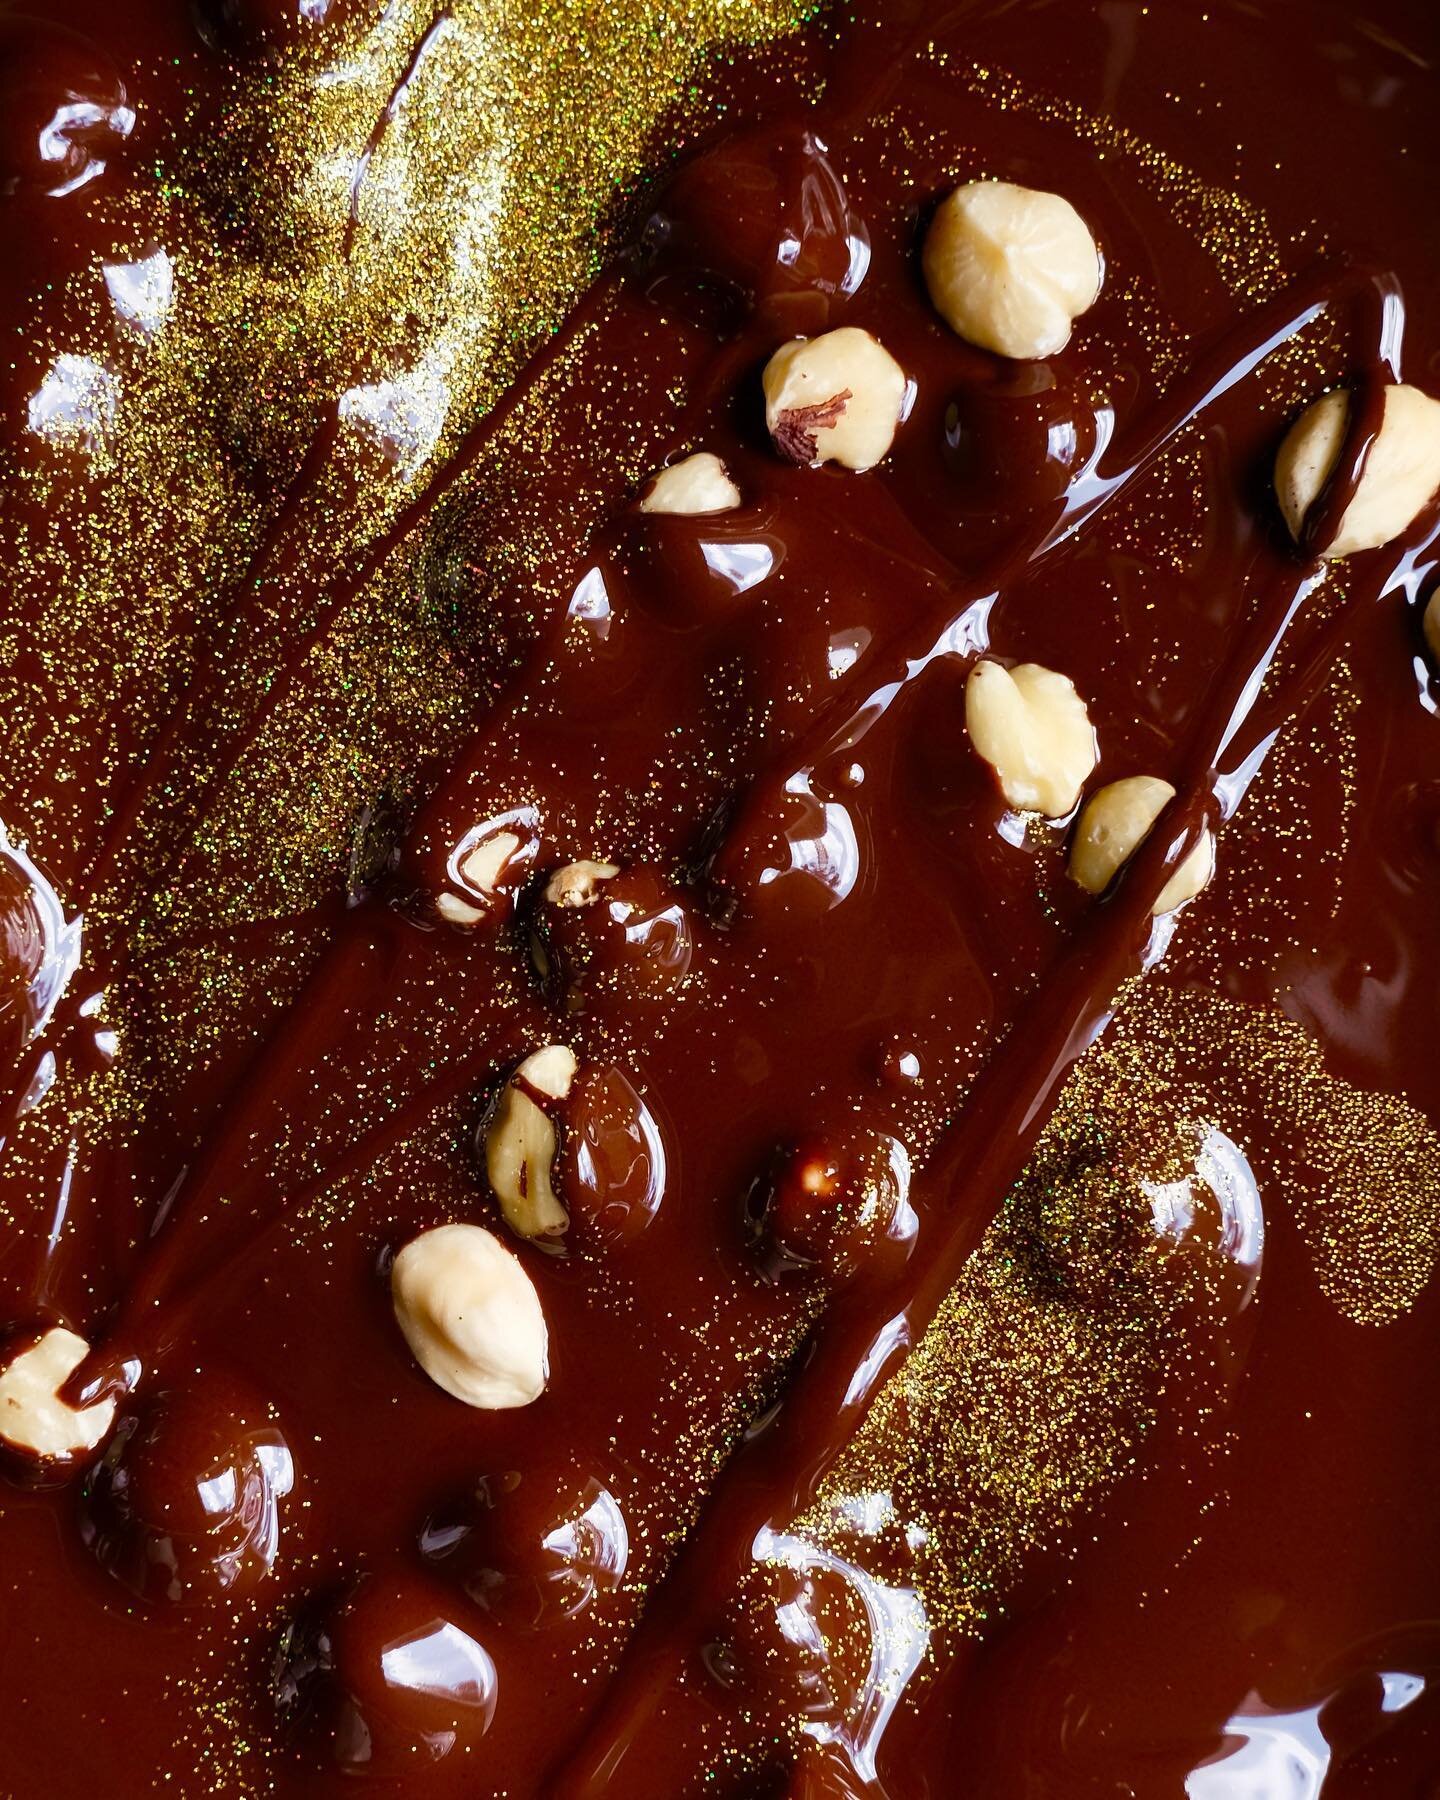 There is something about shiny, closeup food that makes me so excited as a food stylist! When the food is molten and constantly moving, the surprise of the final image is the best &ndash; we don&rsquo;t know exactly where we will end up, but it&rsquo